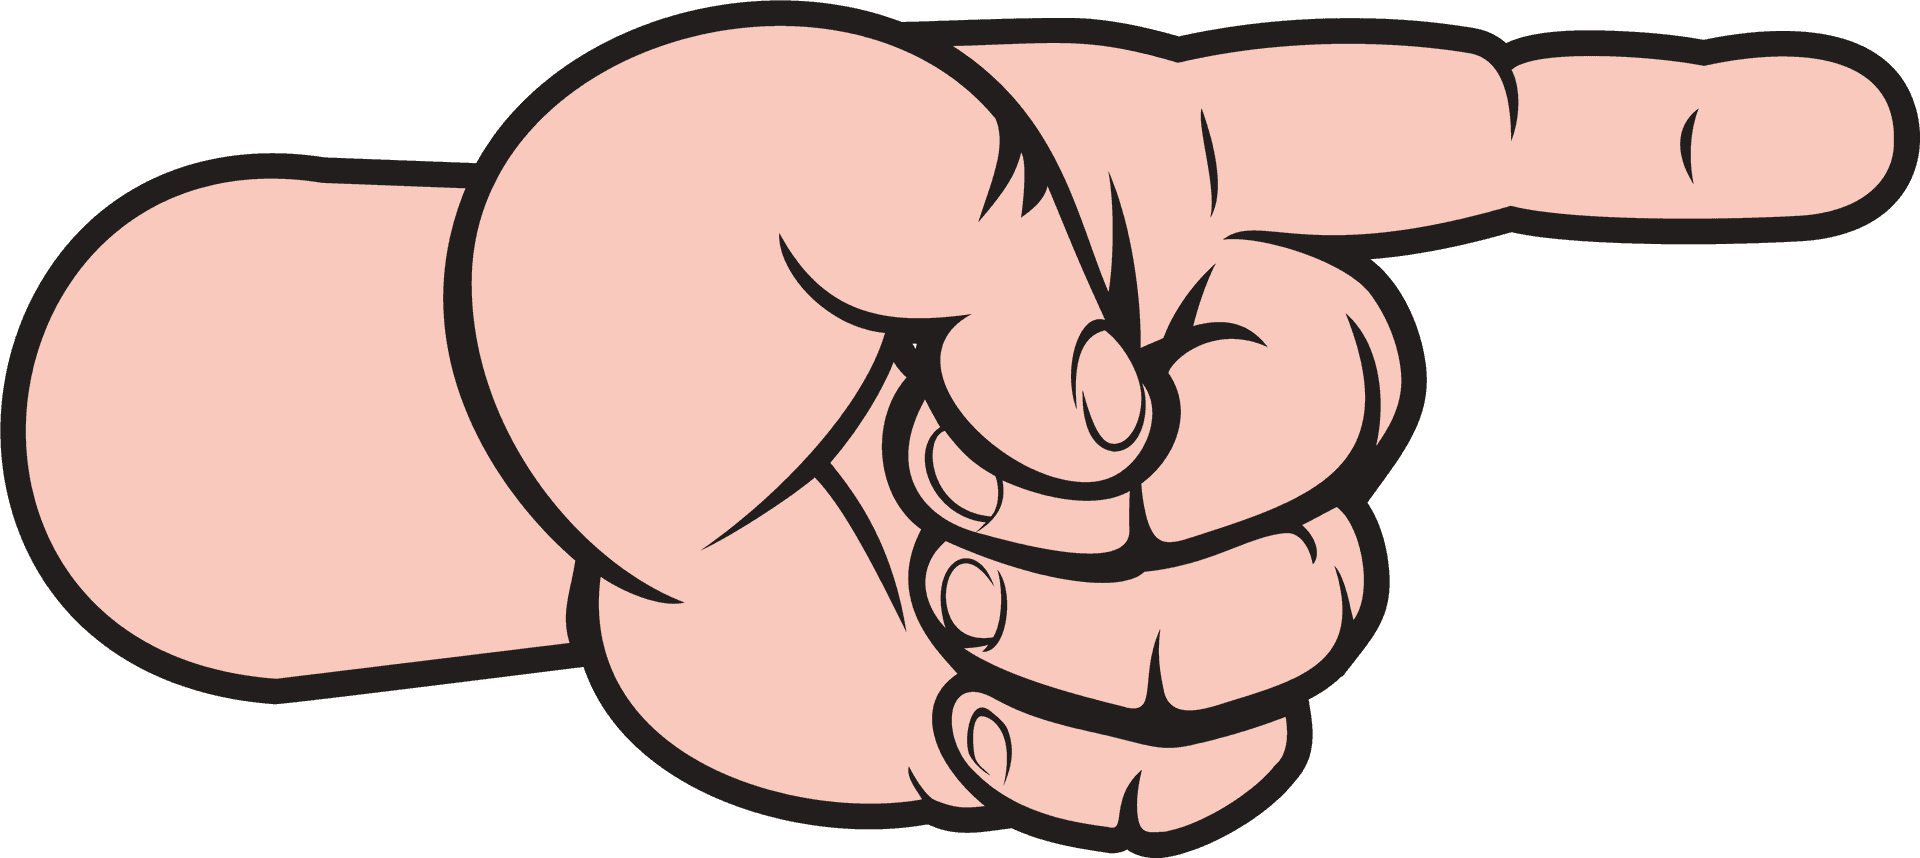 Pointing Hand Clipart PNG